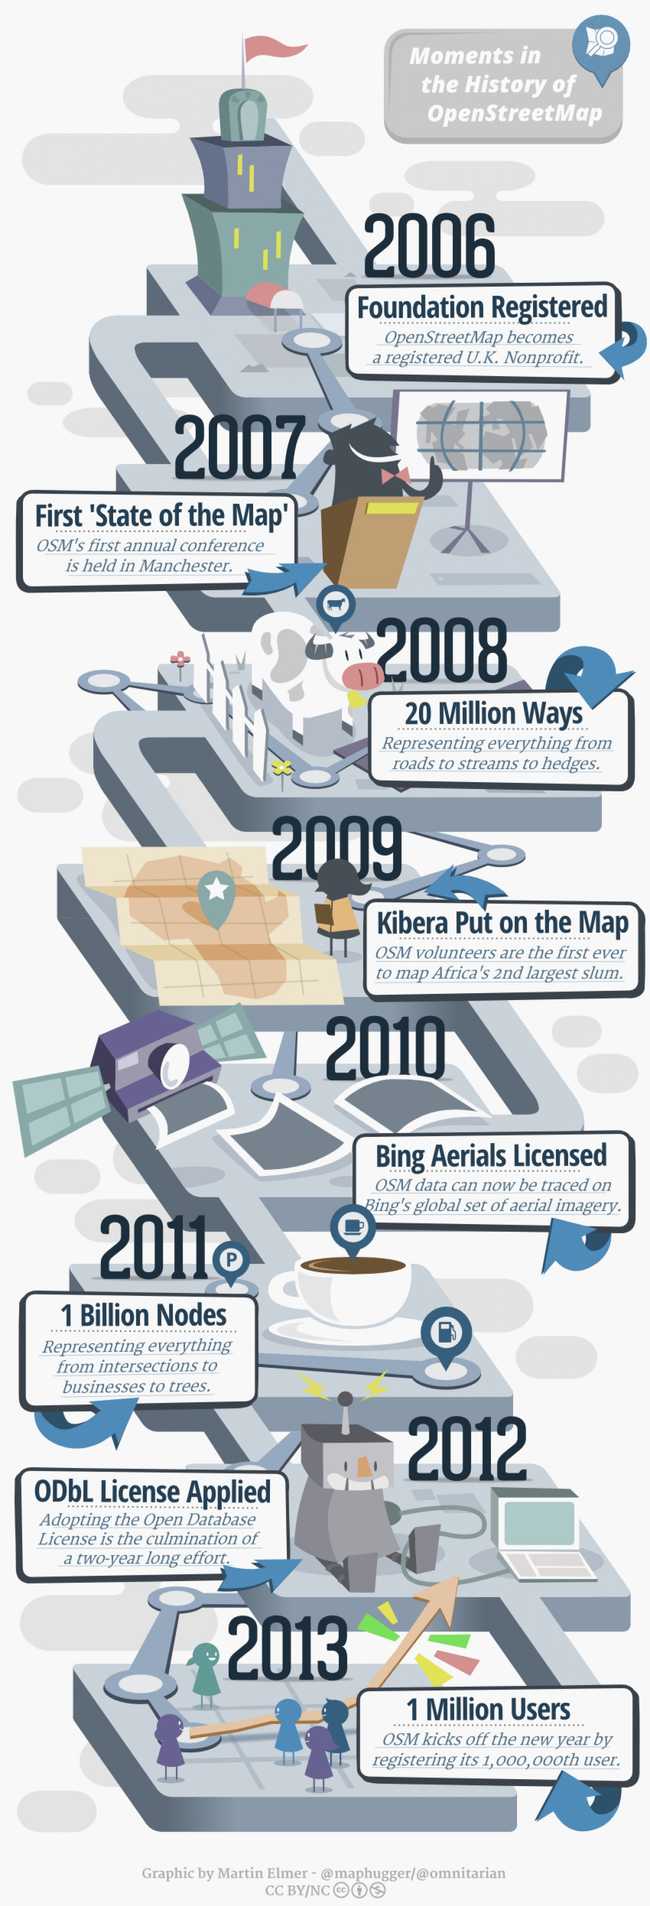 Moments of OpenStreetMap history infographic, by Martin Elmer, from Visually